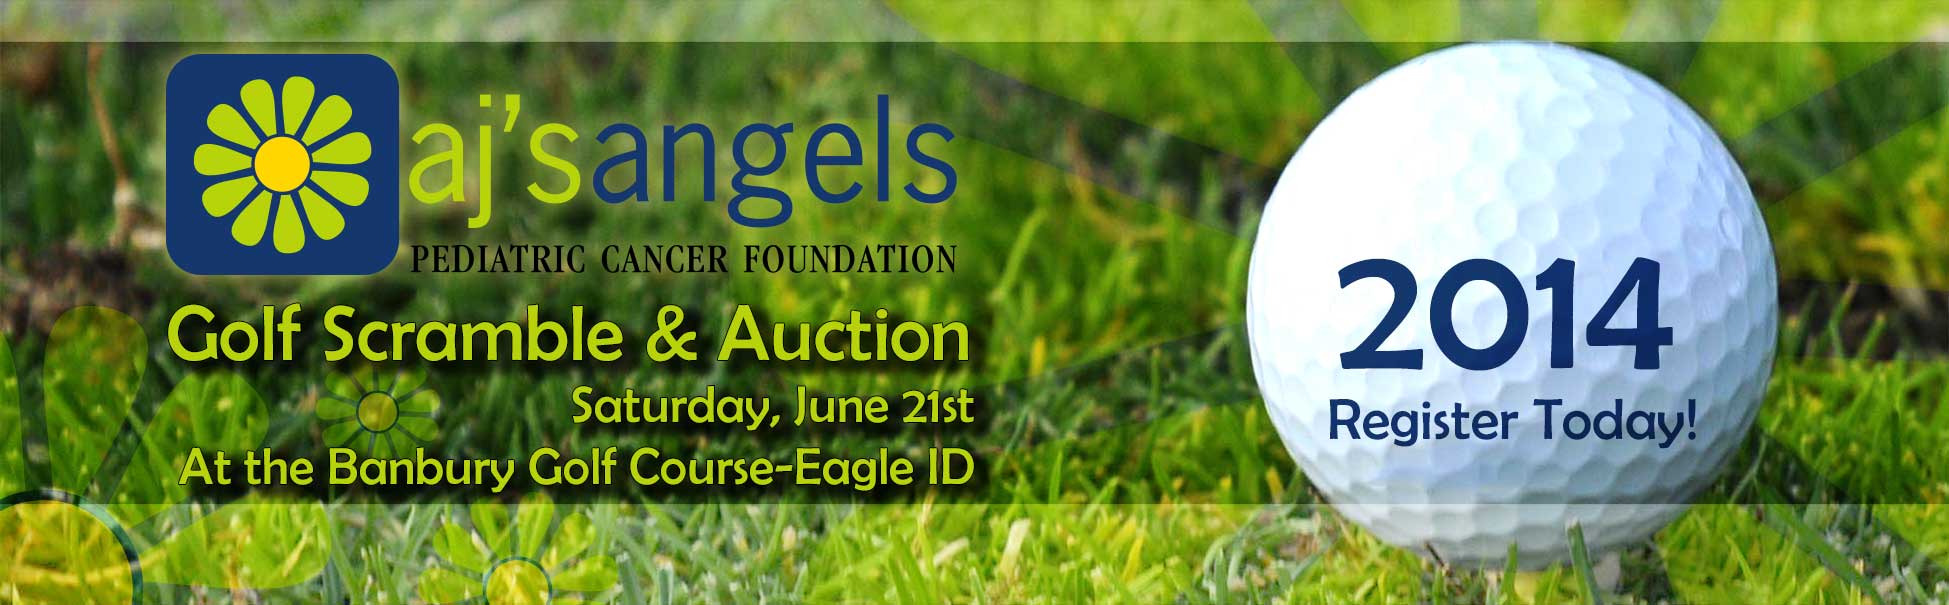 2014 Golf Scramble and Auction header